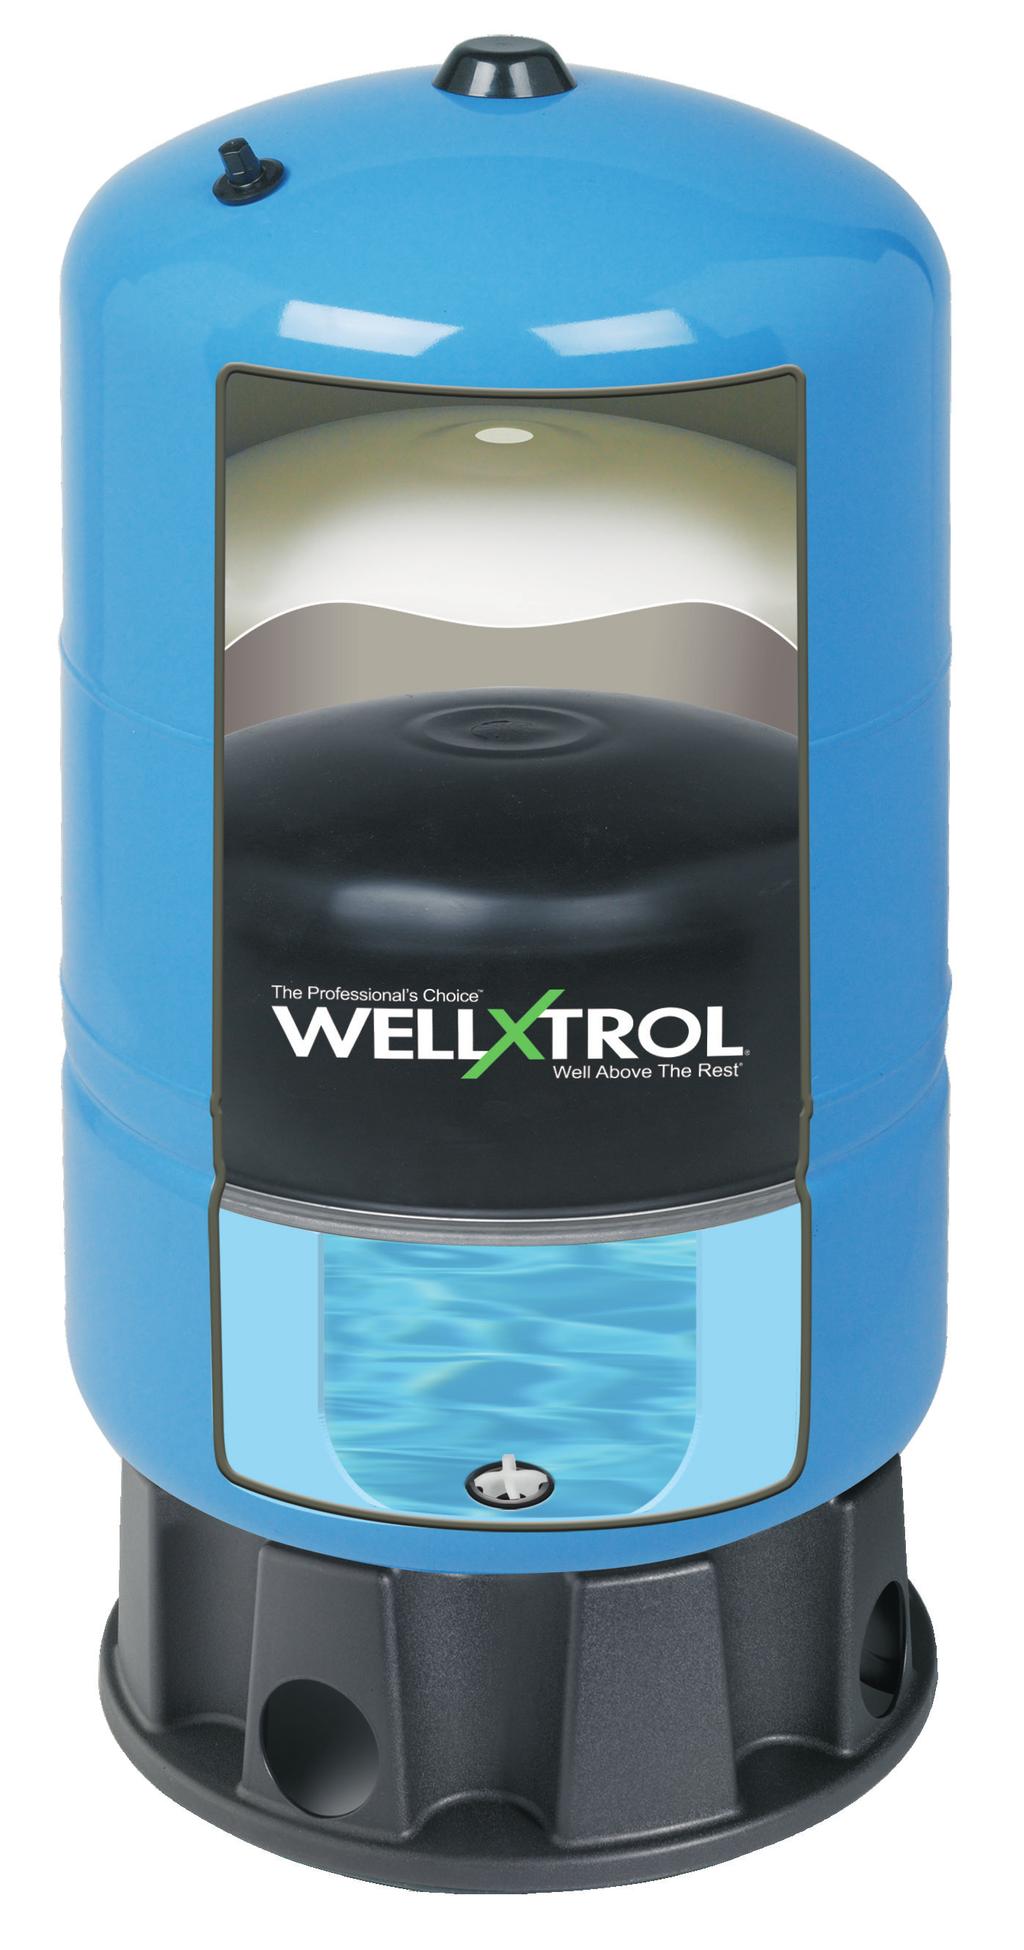 7 Year Warranty Installers asked for it - we delivered. A Well-X-Trol exclusive and the best warranty in the industry.